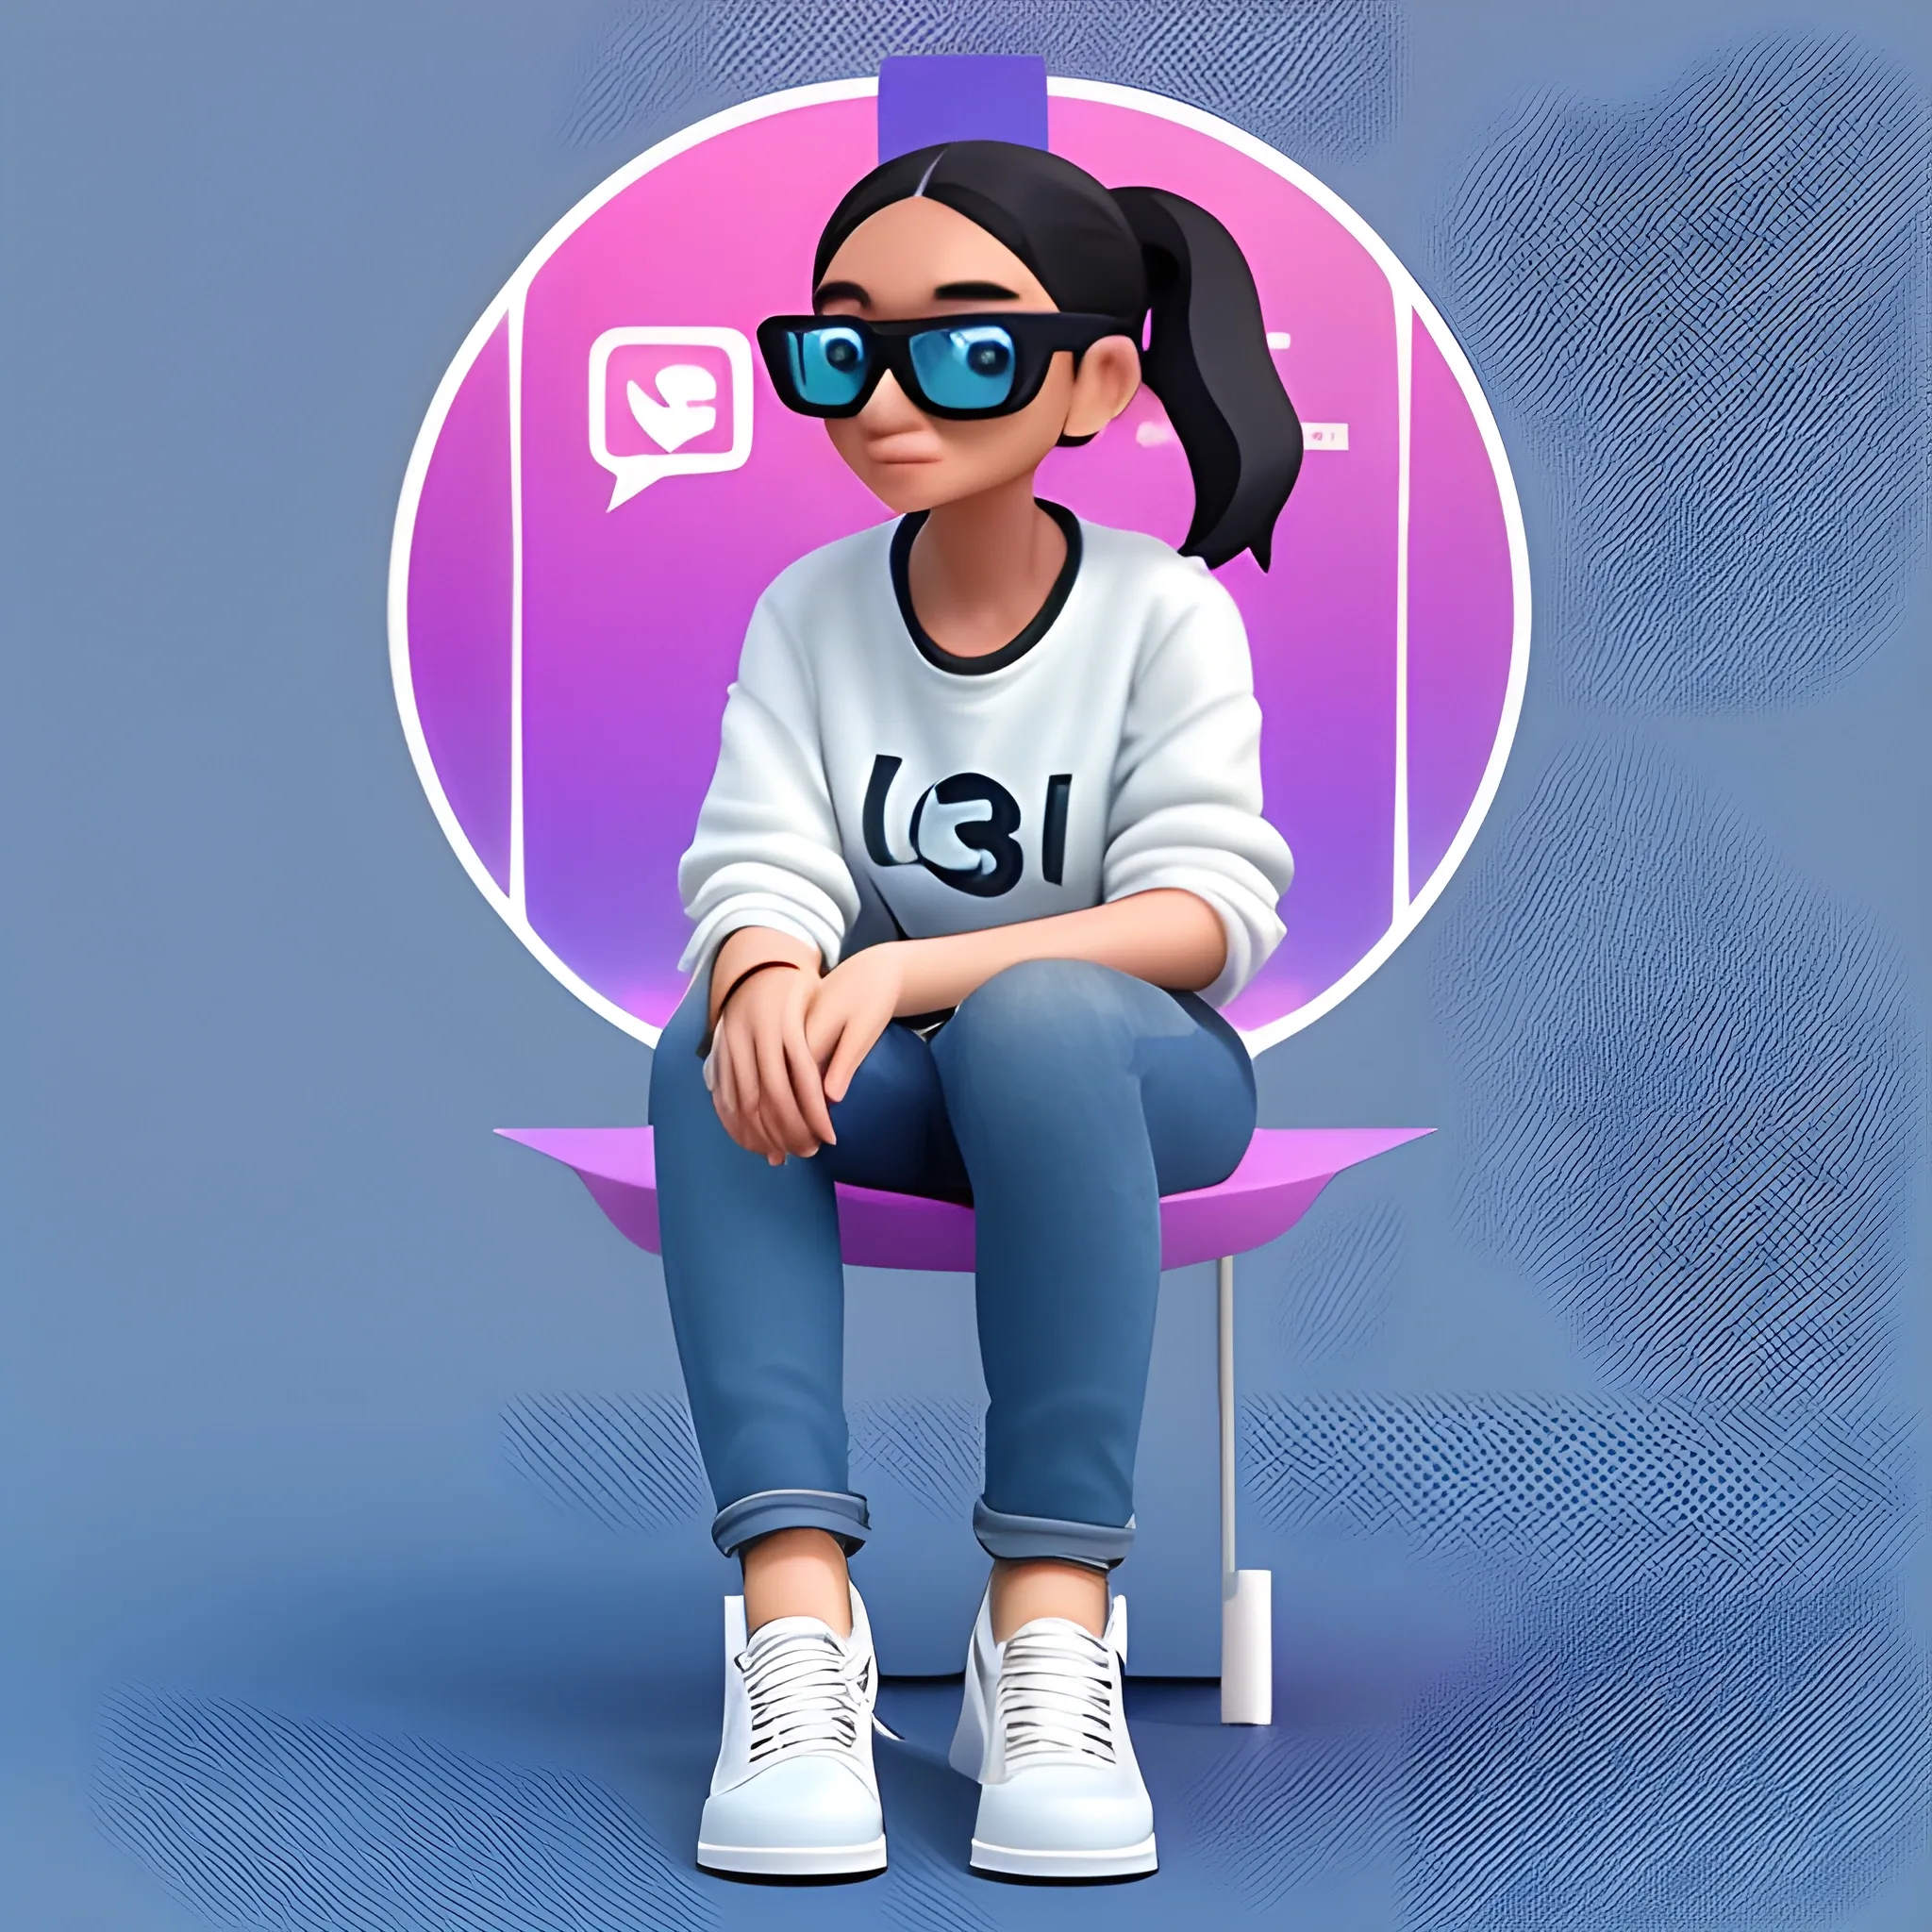 Create a 3D illustration of an animated character sitting casually on top of a social media logo "Instagram".A female character.The character must wear casual modern clothing such as jeans jacket and sneakers shoes. The background of the image is a social media profile page with a user name "Itz_s_neha07" and a profile picture that match., 3D